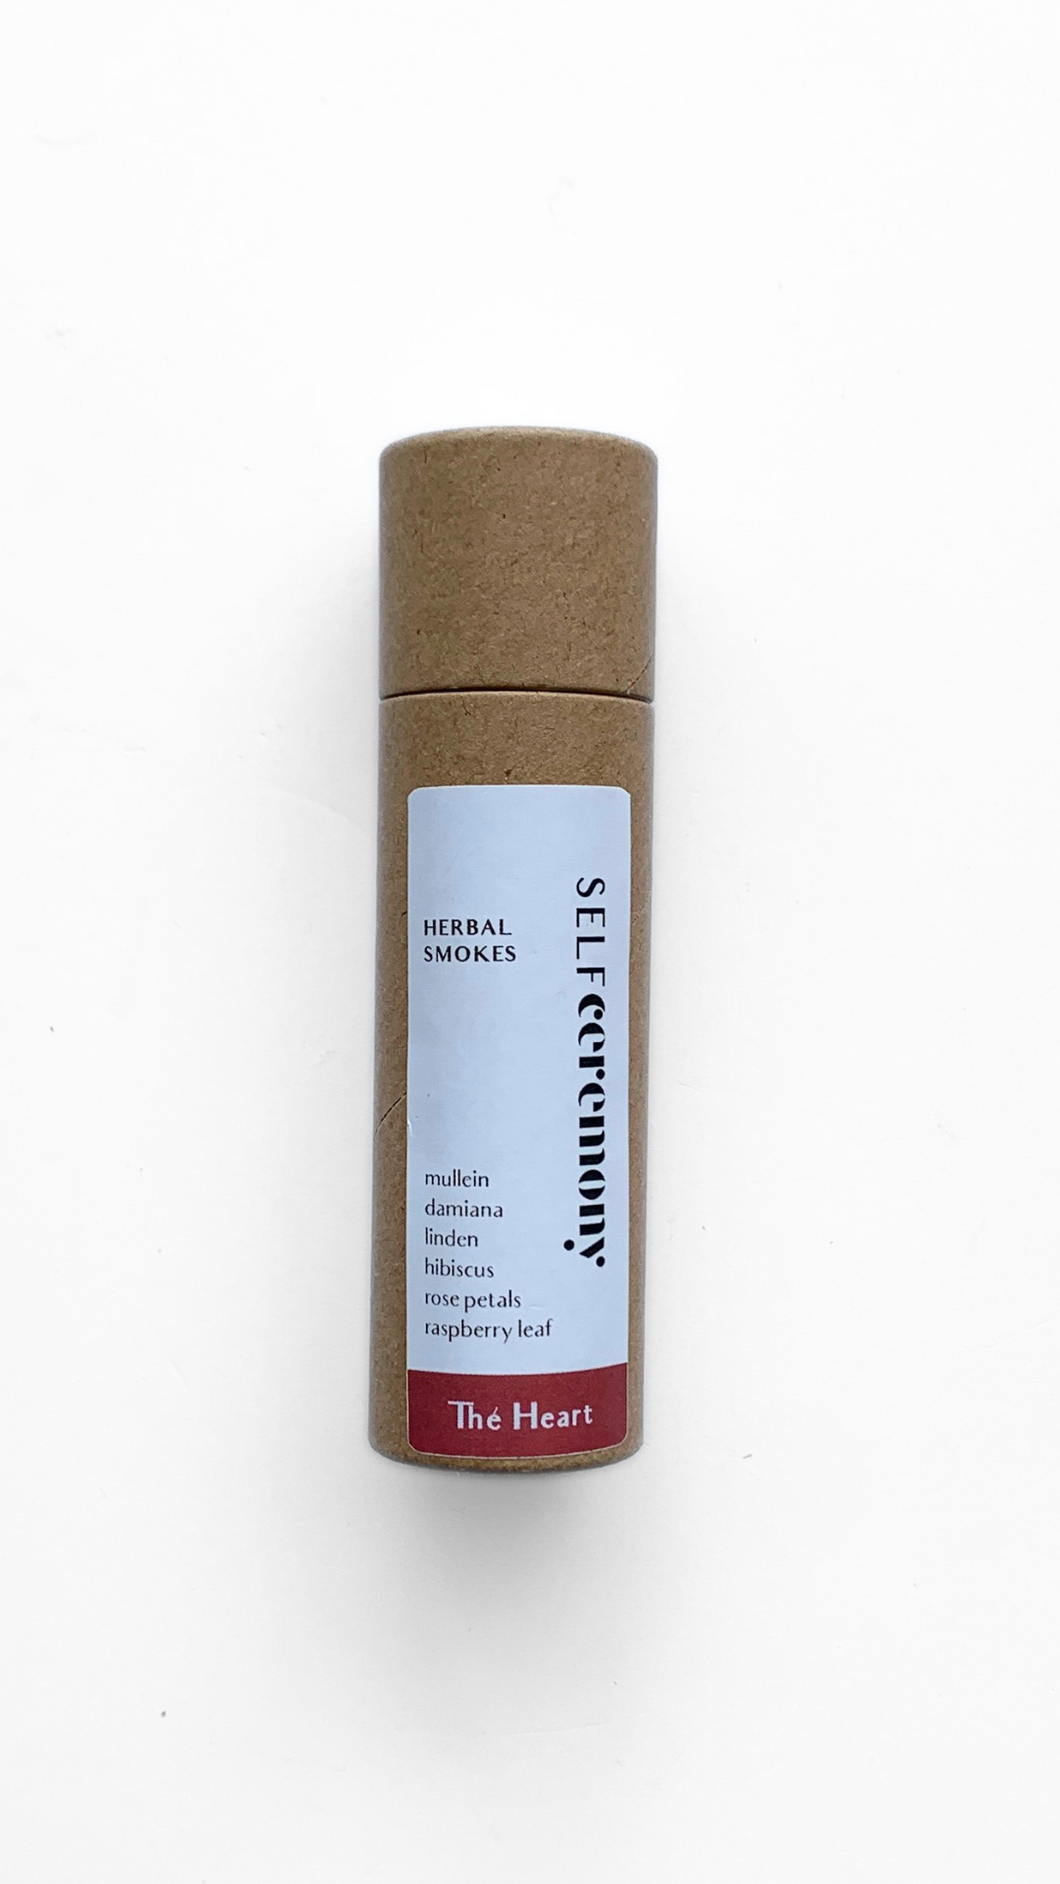 Herbal Pre-Rolled Smokes, The Heart